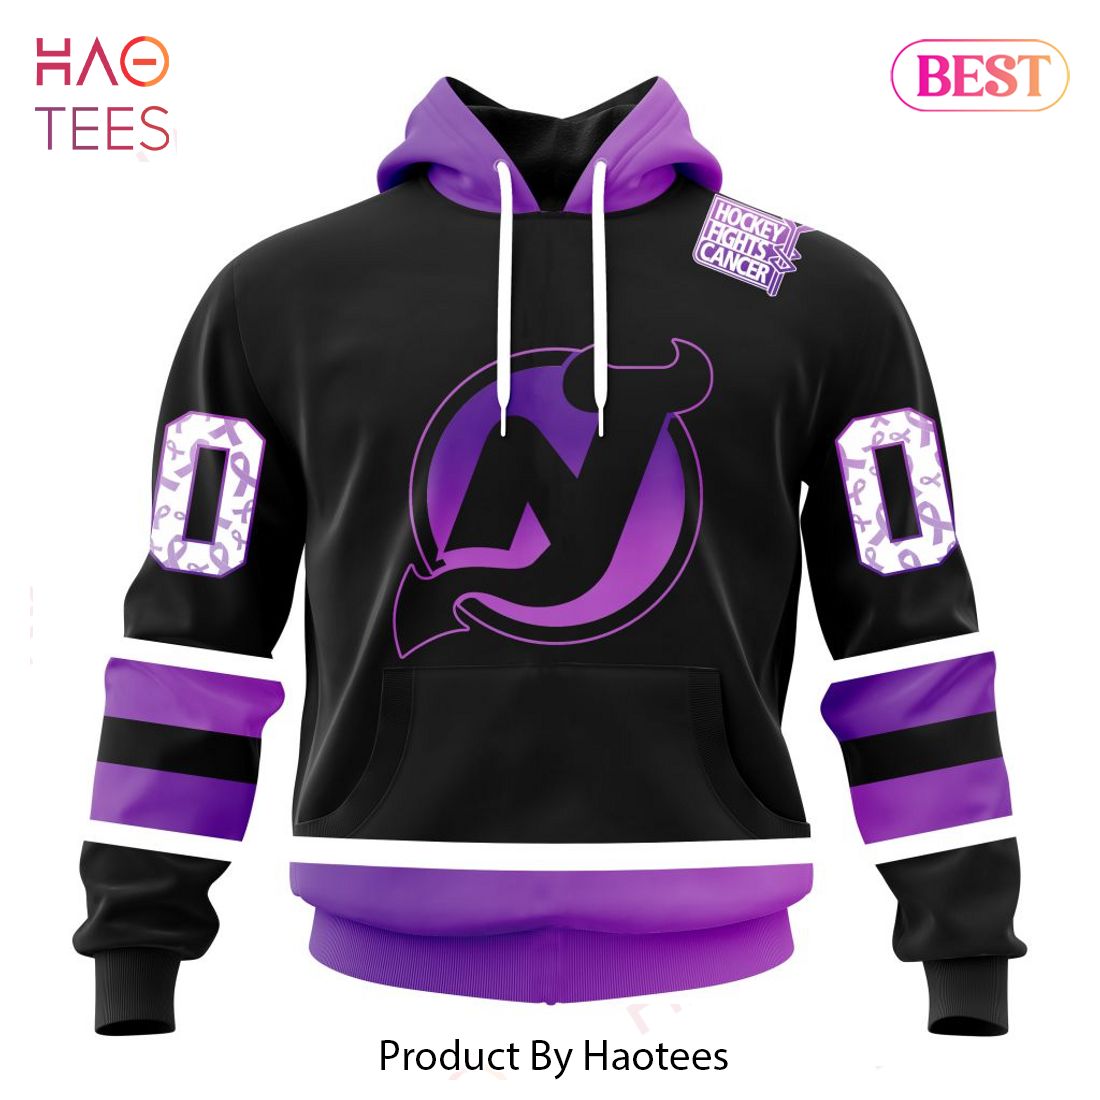 New Jersey Devils Hockey Fights Cancer